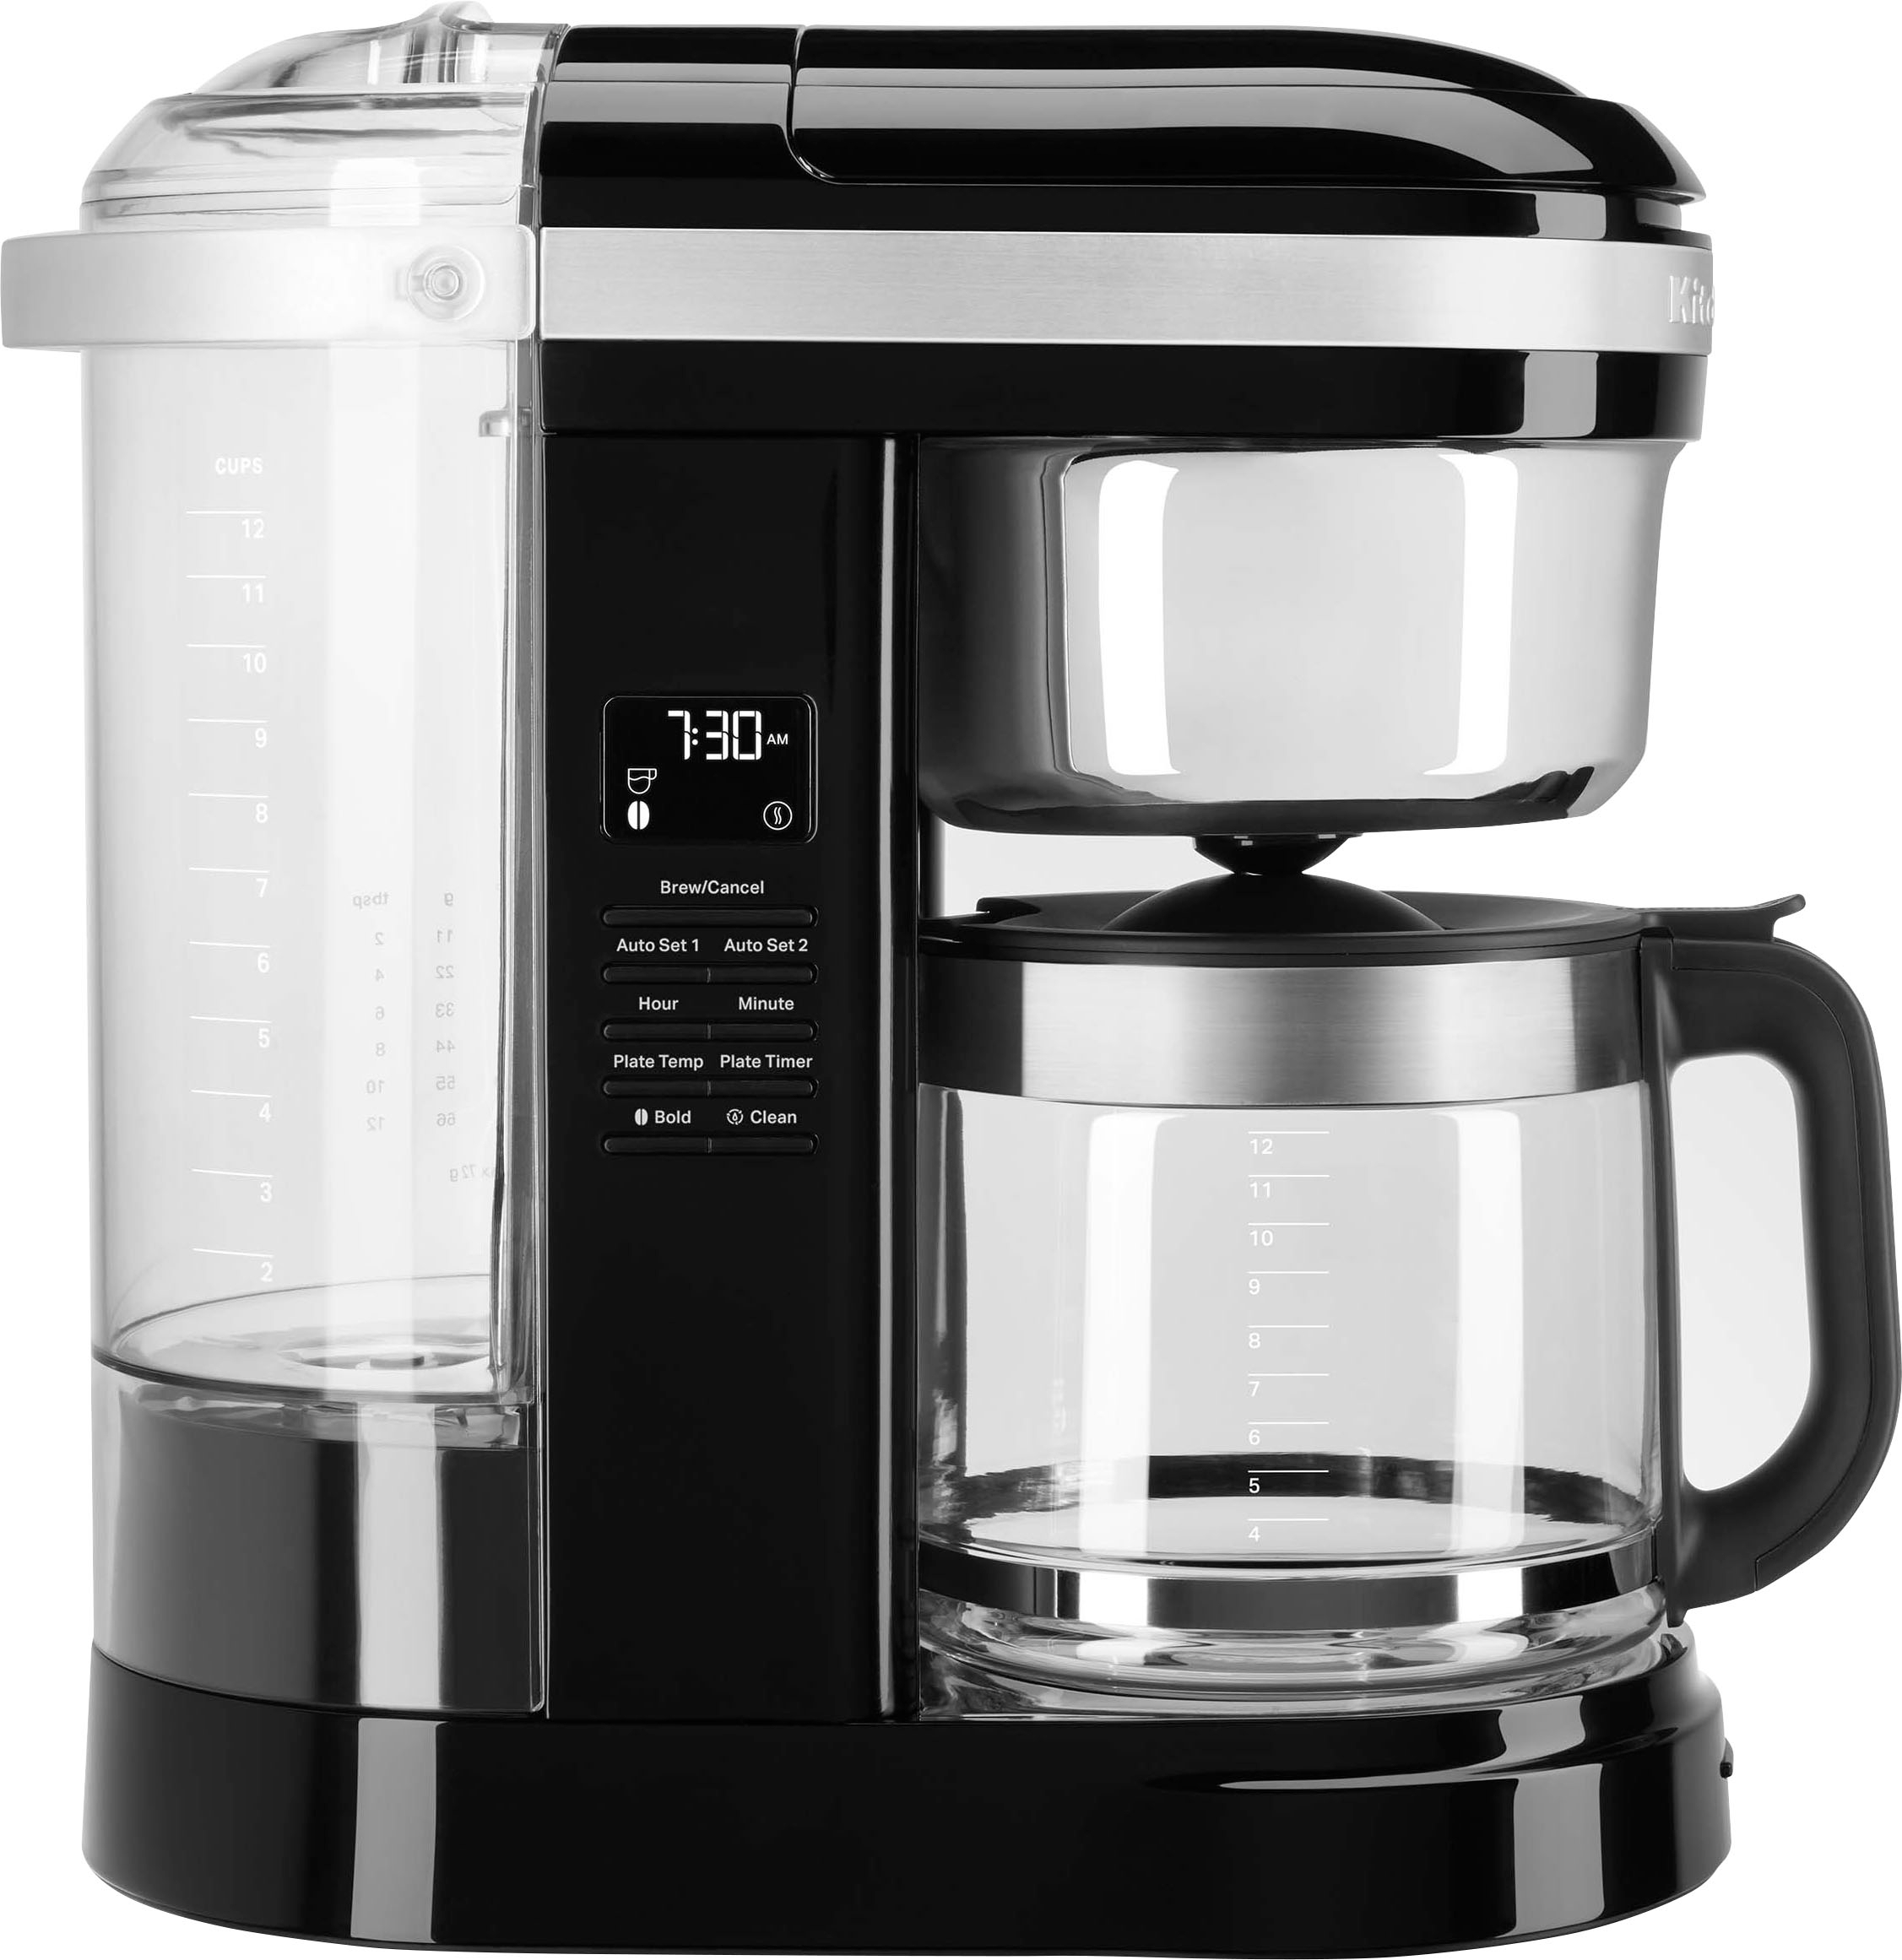 Kitchenaid 12-cup Coffee Maker With Spiral Showerhead - Matte Gray